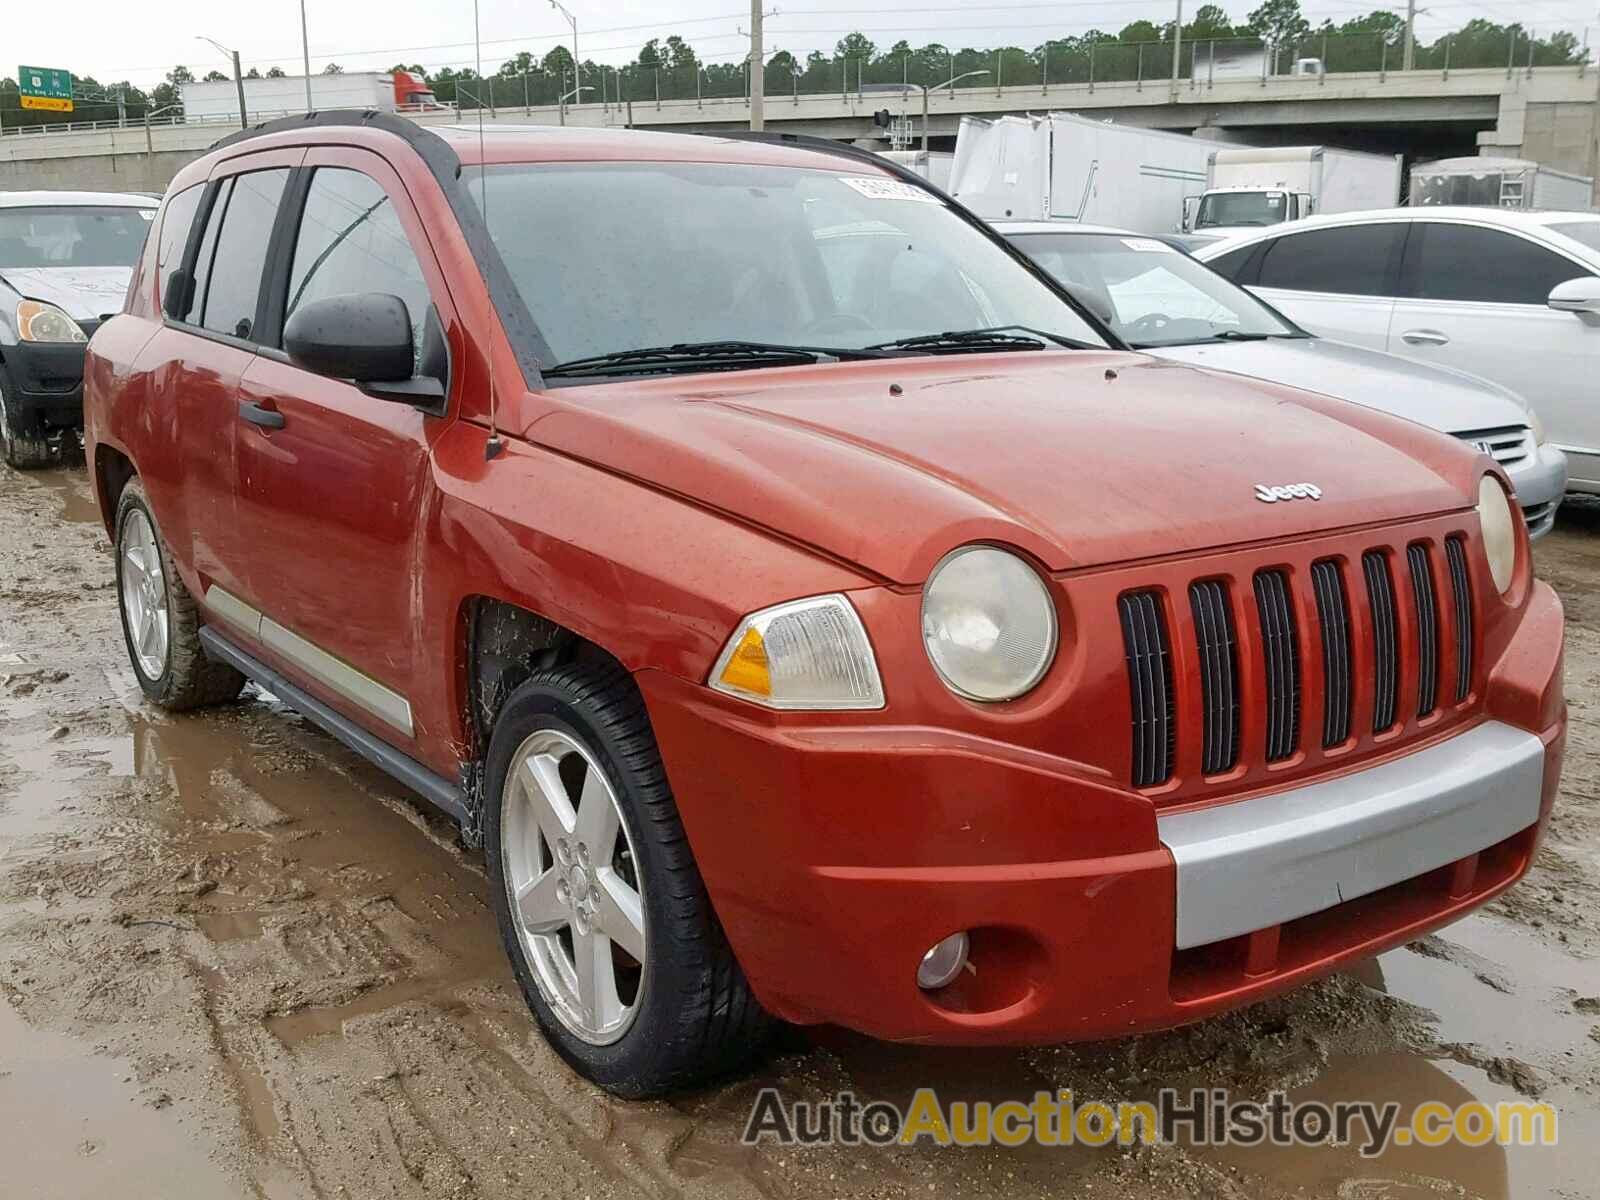 2007 JEEP COMPASS LIMITED, 1J8FT57W67D216276